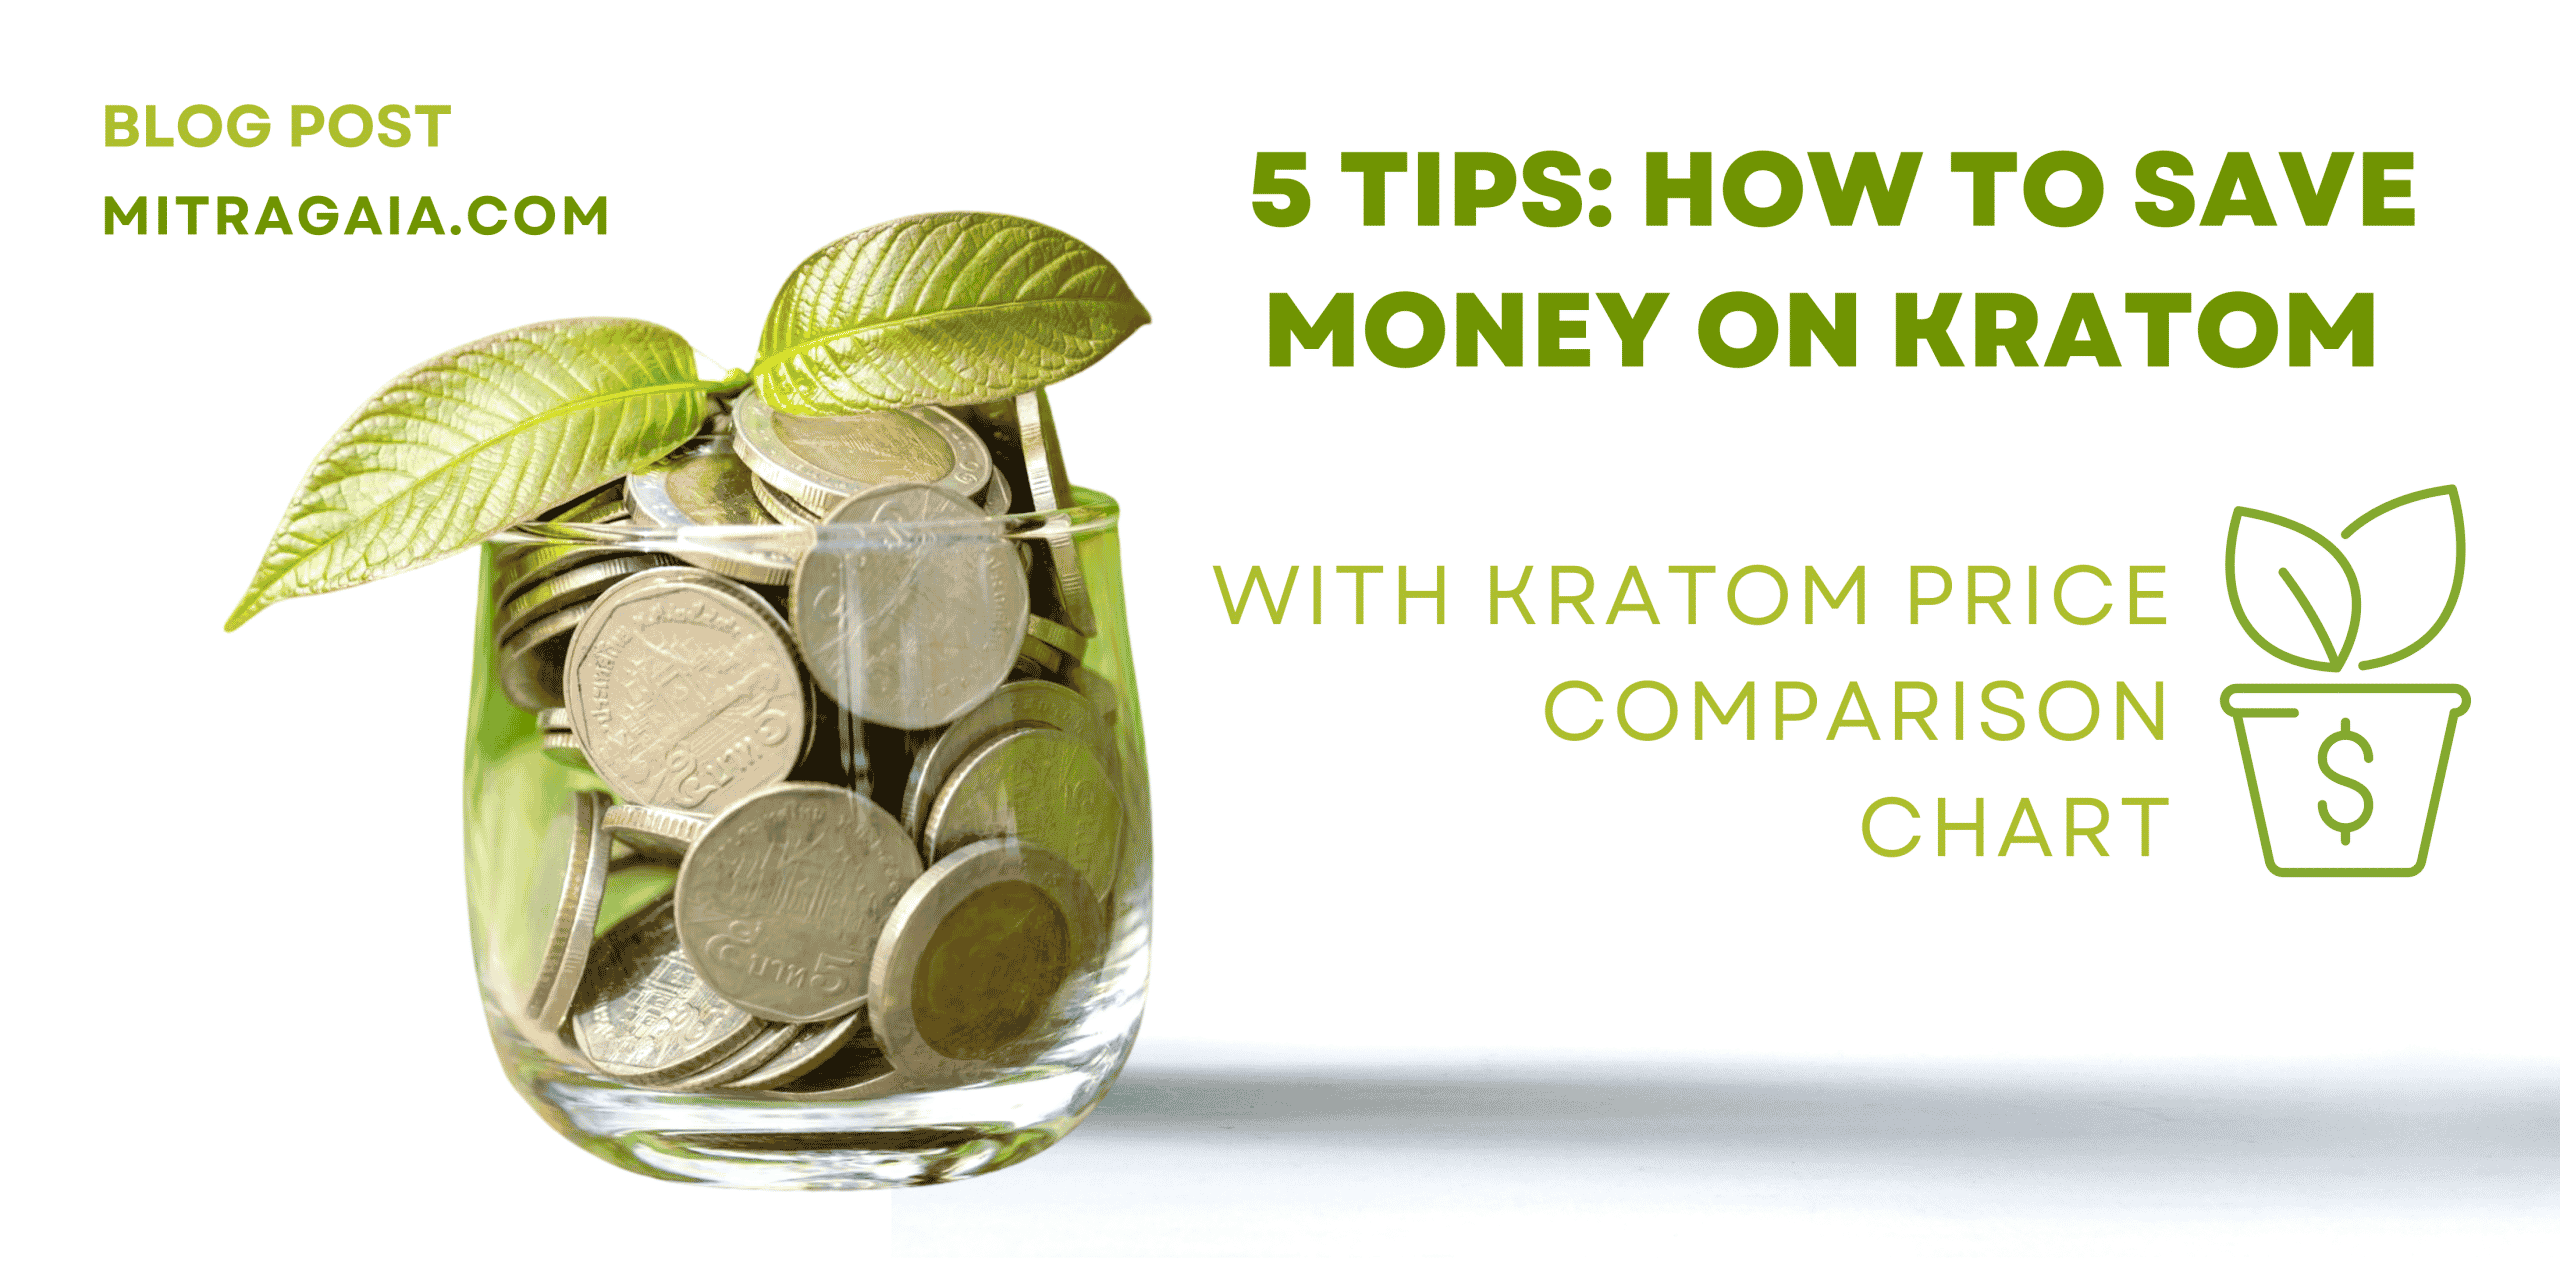 Photo of a coin jar with kratom leaf